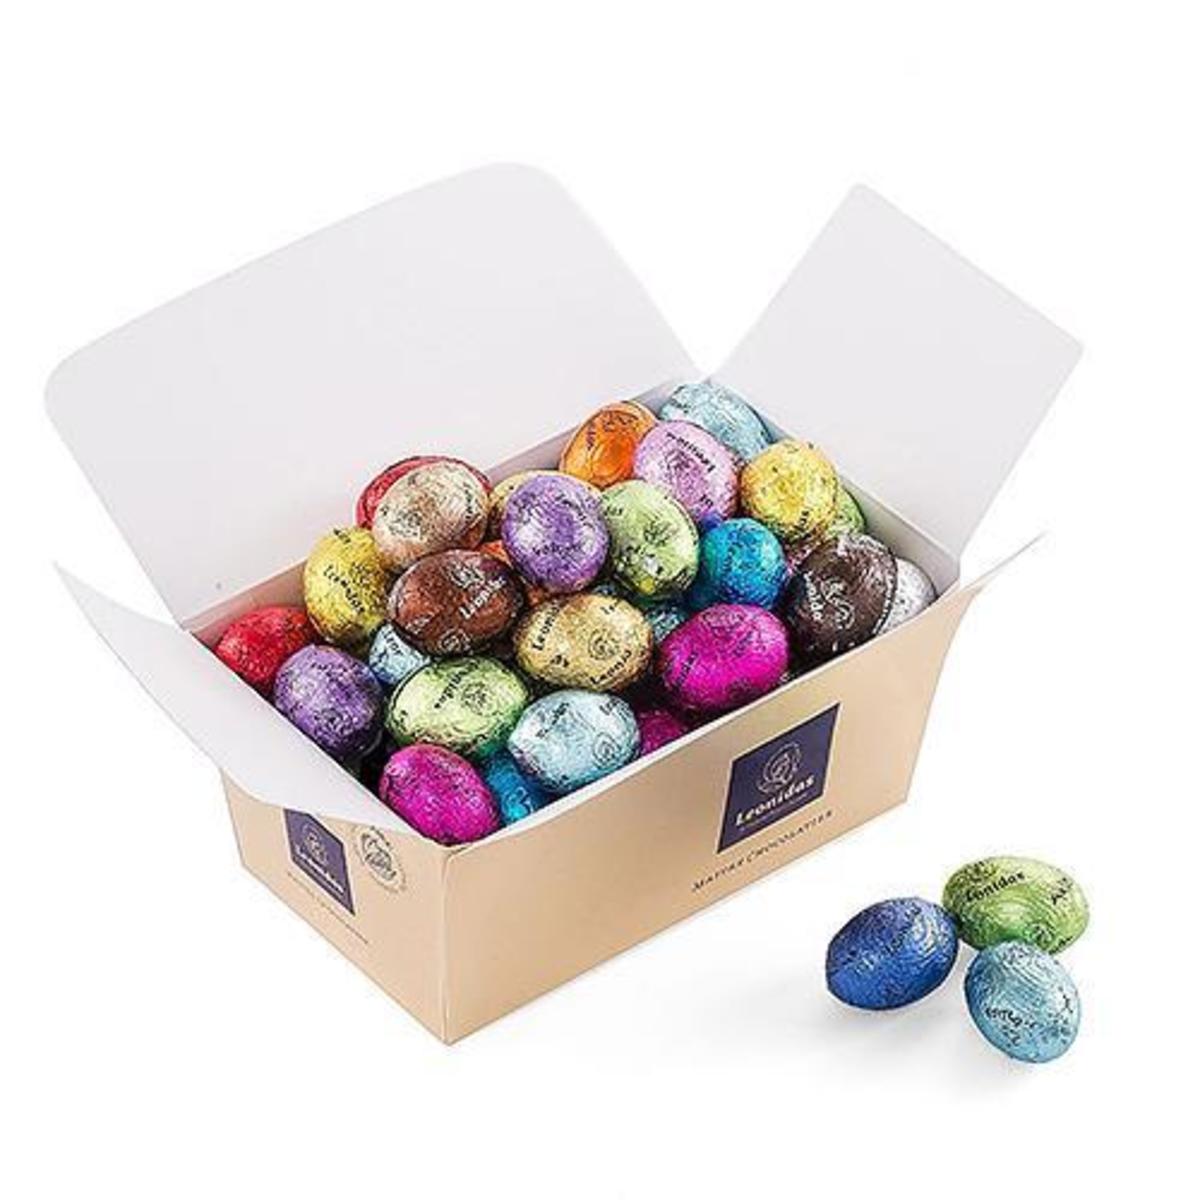 The Best Luxury Easter Egg Chocolates